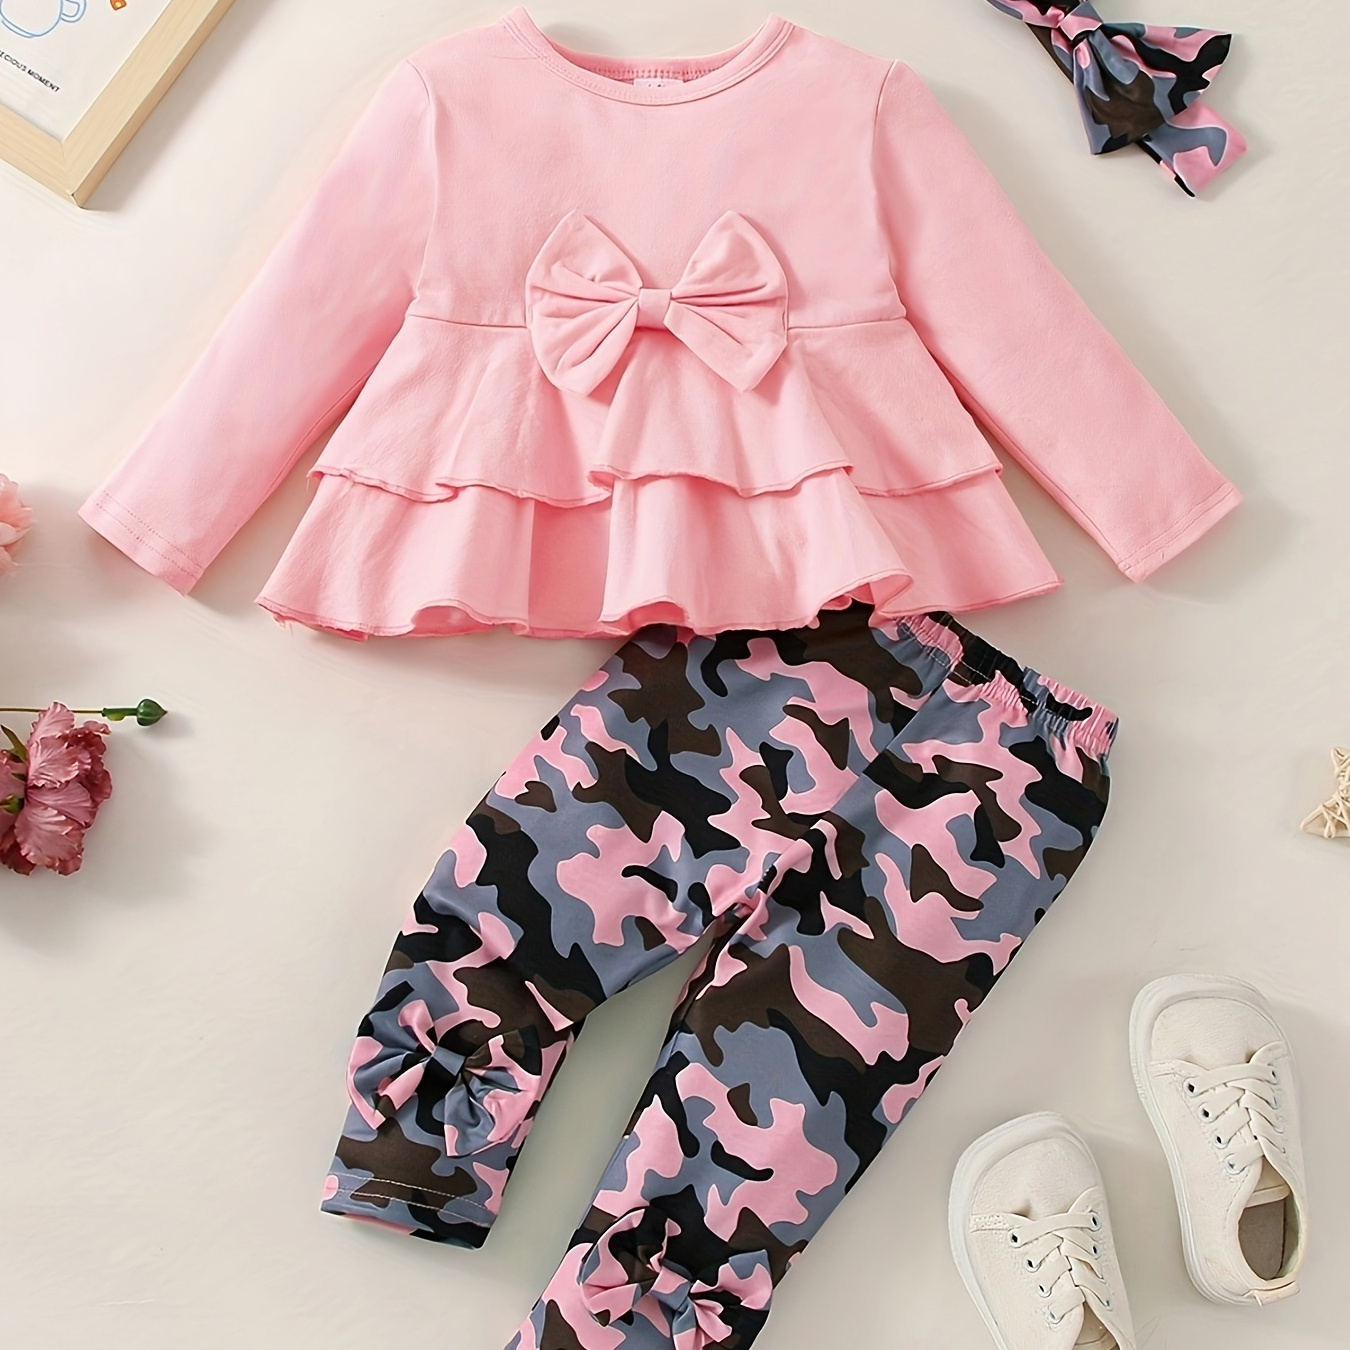 

Baby Girl Clothes Infant Girl Clothes Fall Winter Outfits Sweatshirt Long Sleeve Ruffle Tops Pants Headband 6-24m